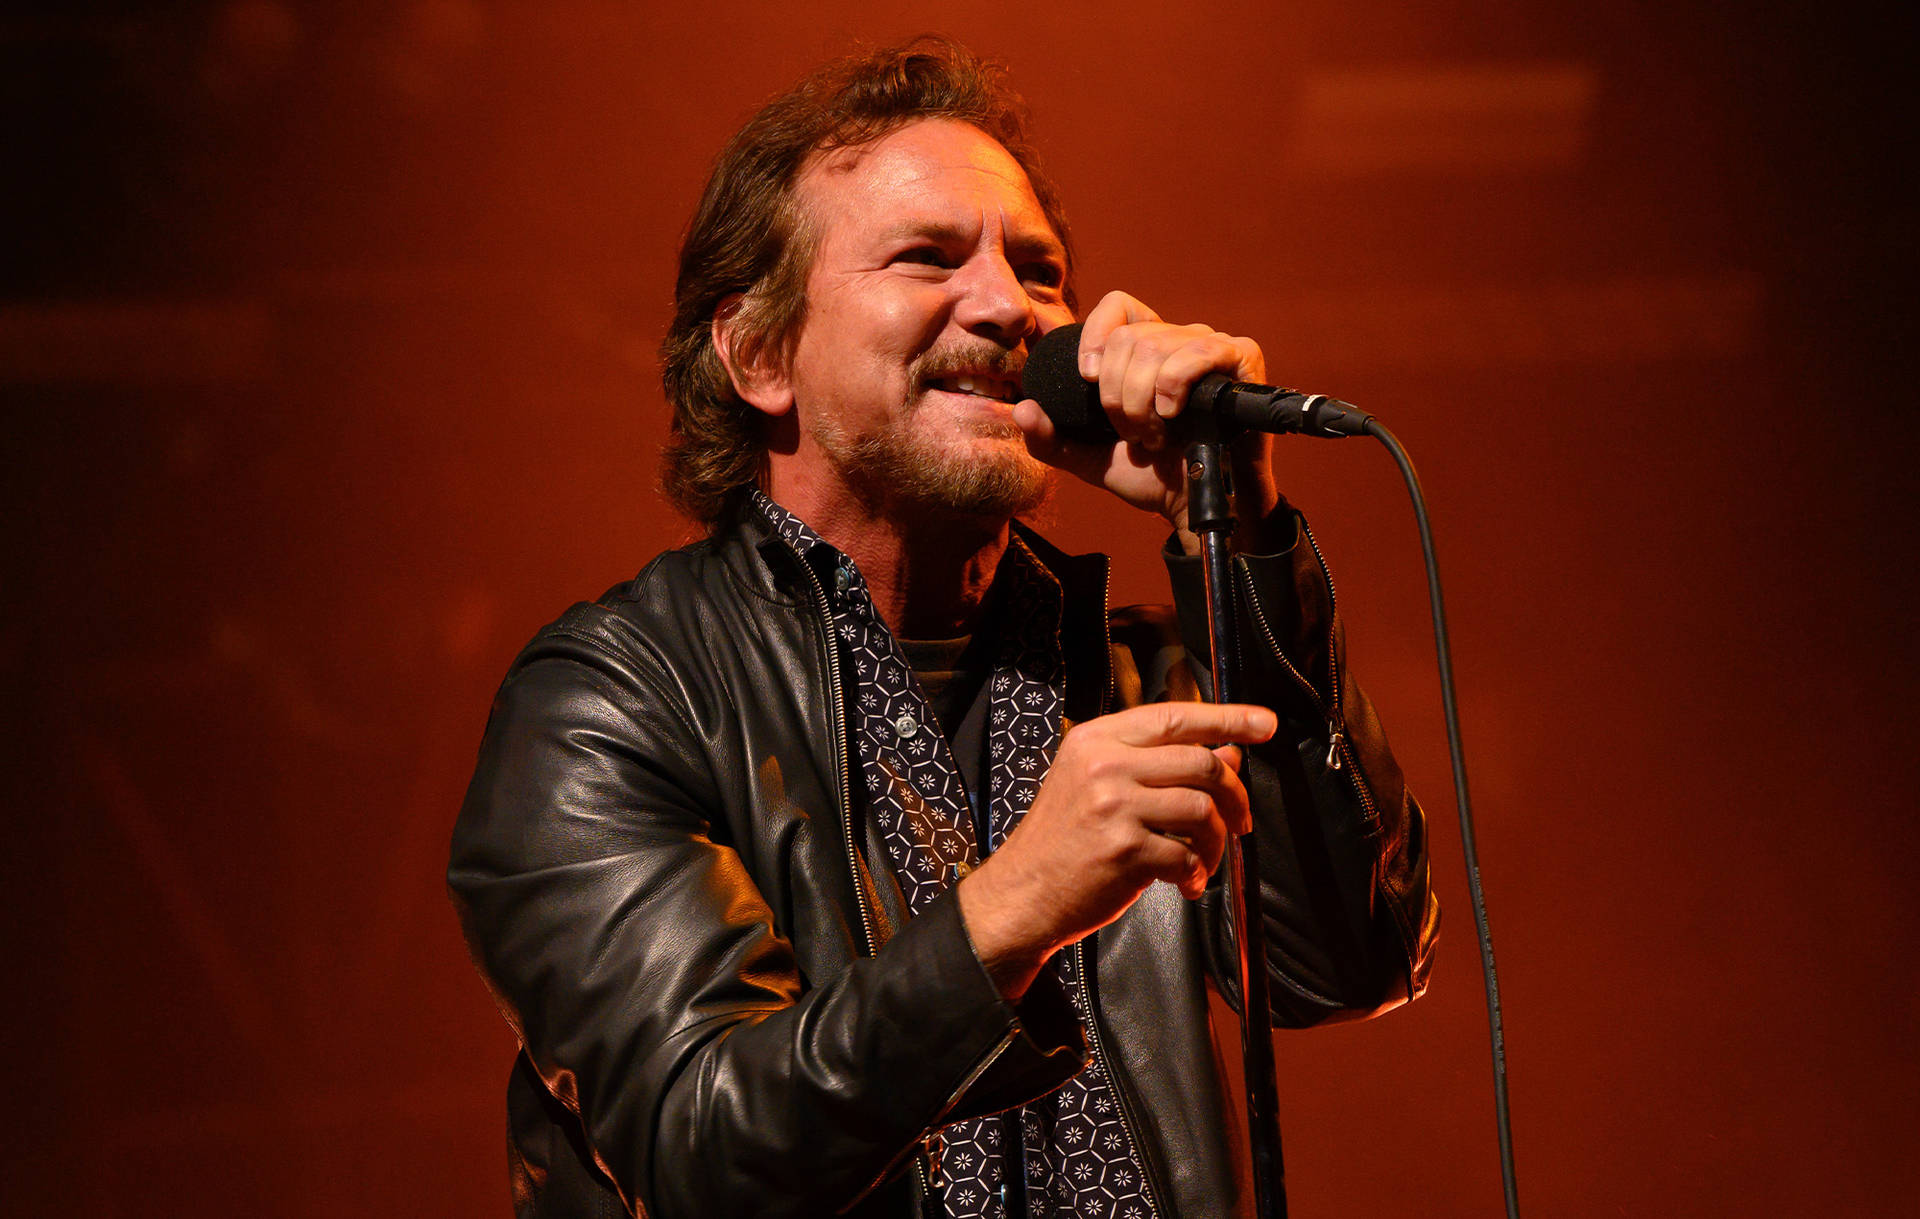 Caption: Iconic Pearl Jam's Lead Vocalist, Eddie Vedder In Live Rock Band Performance